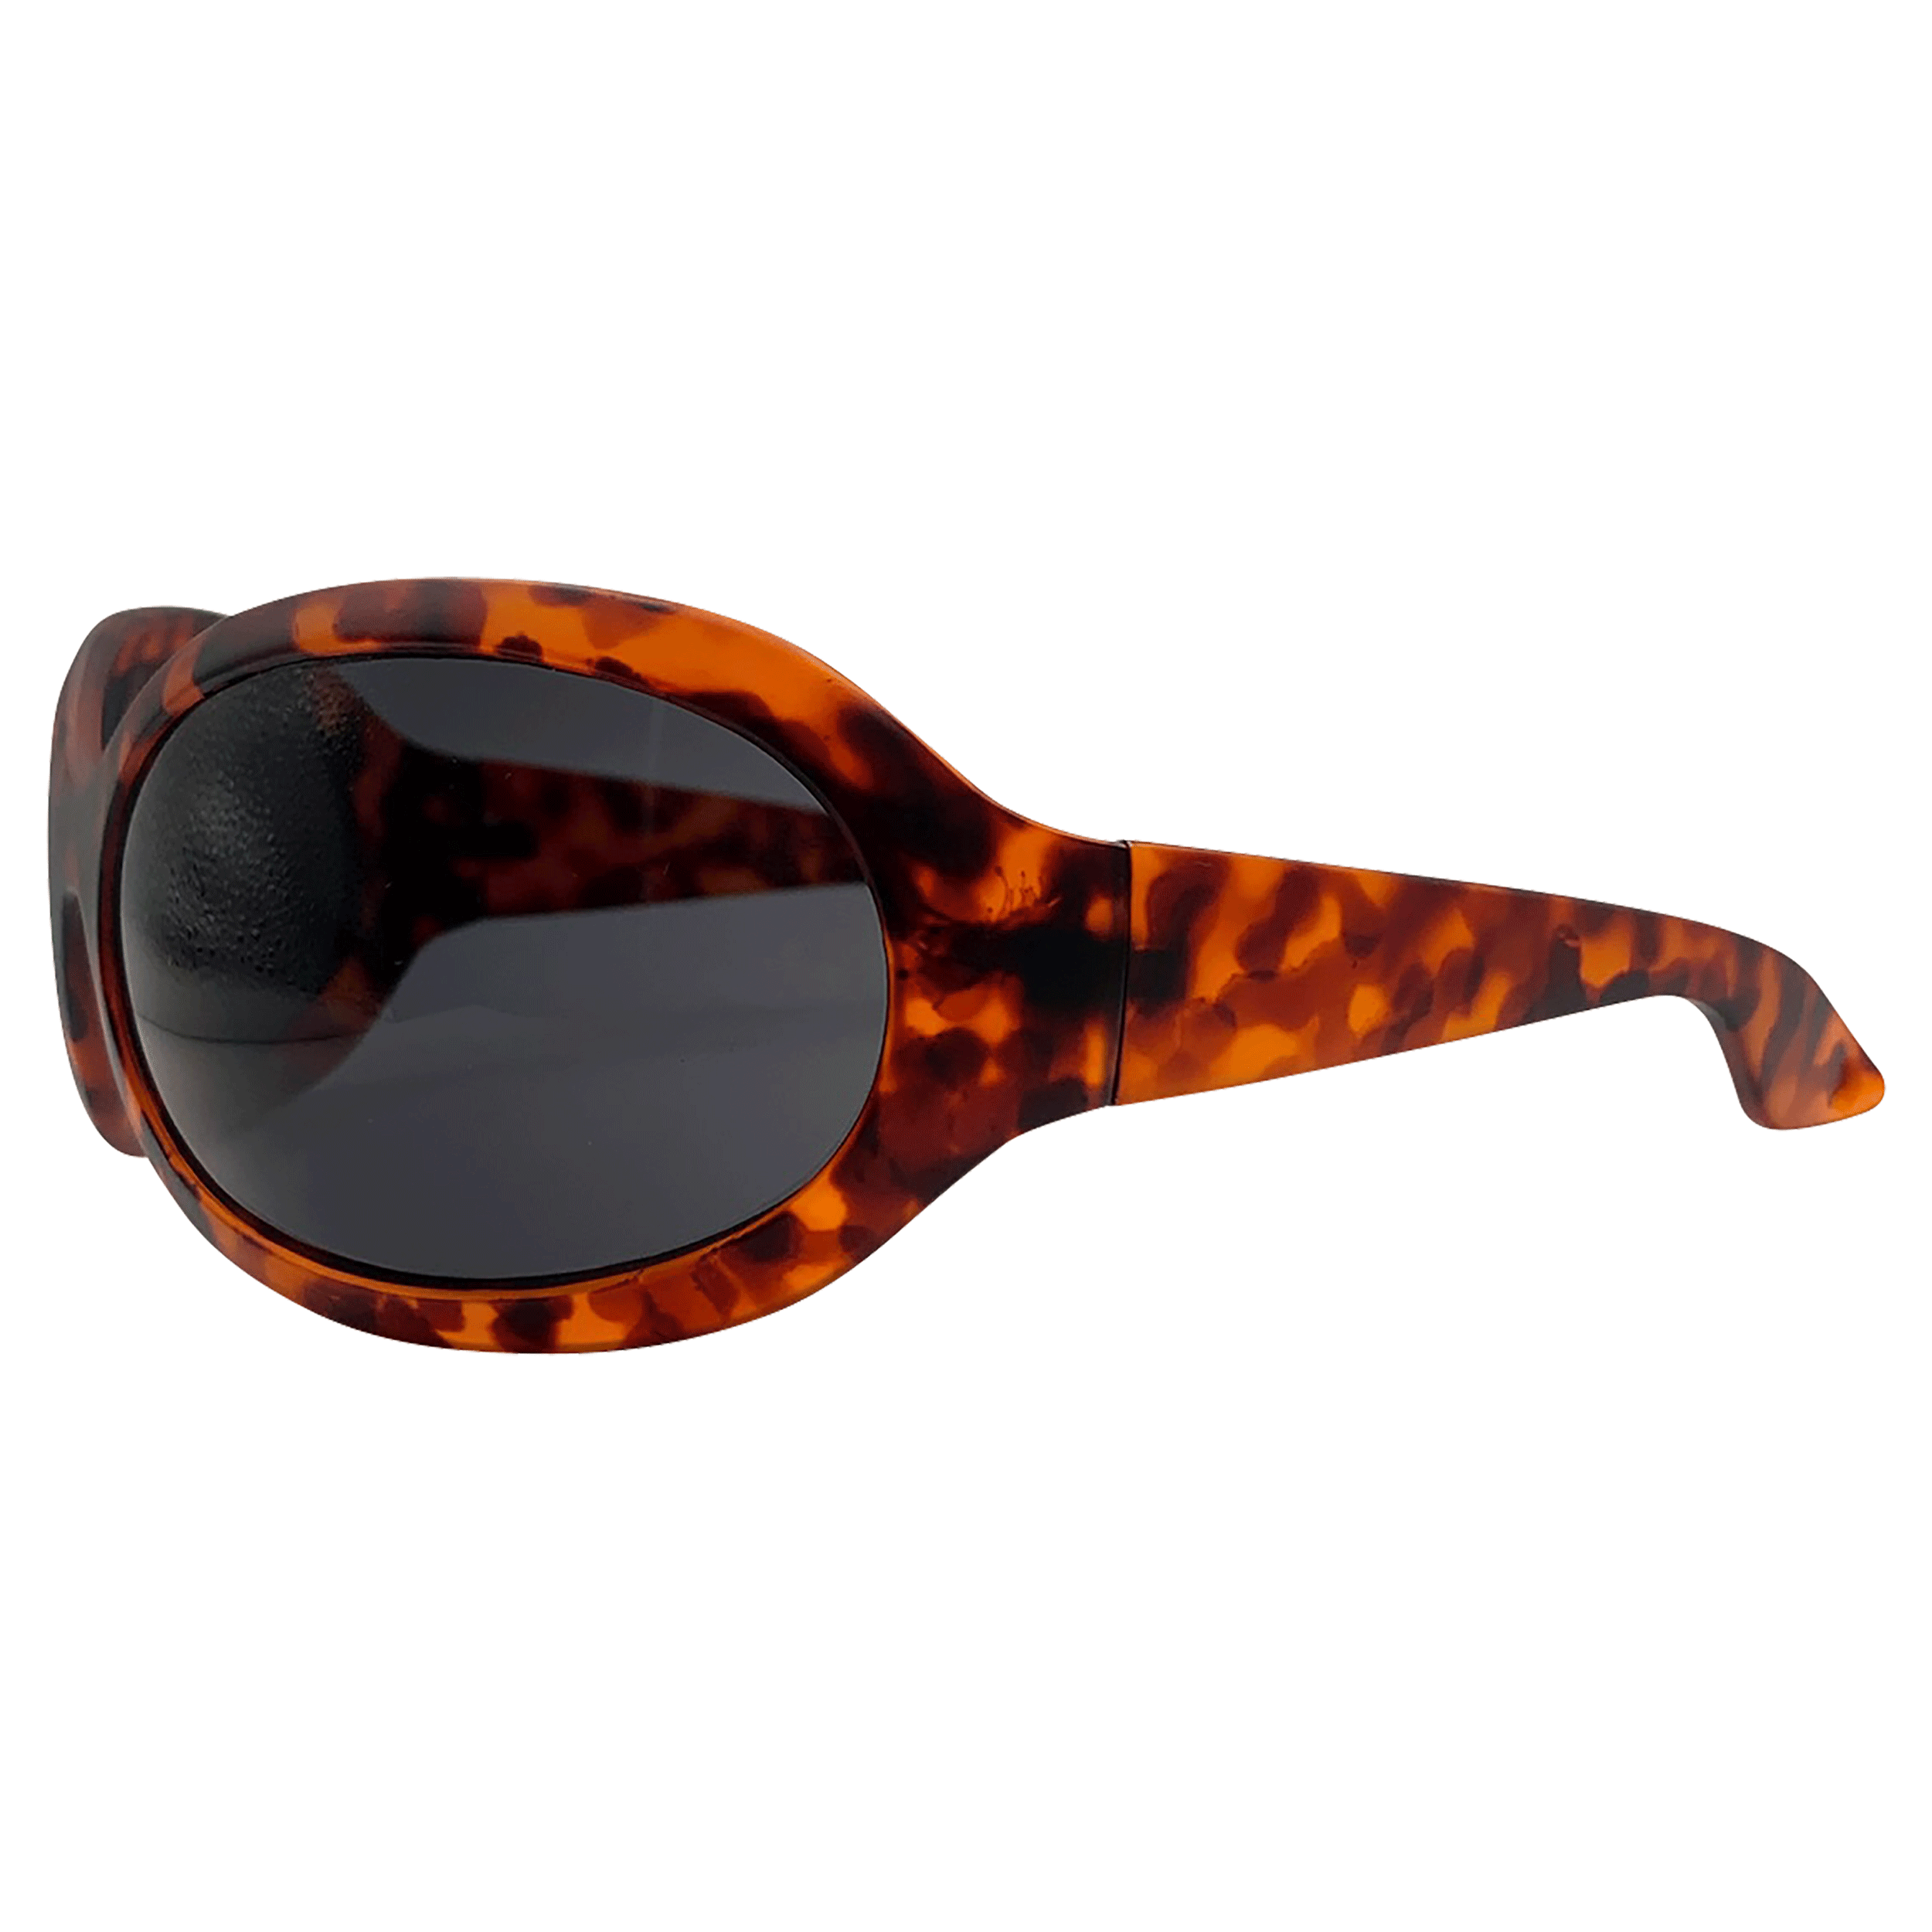 FIFTY SEVEN 90s Oversized Sunglasses